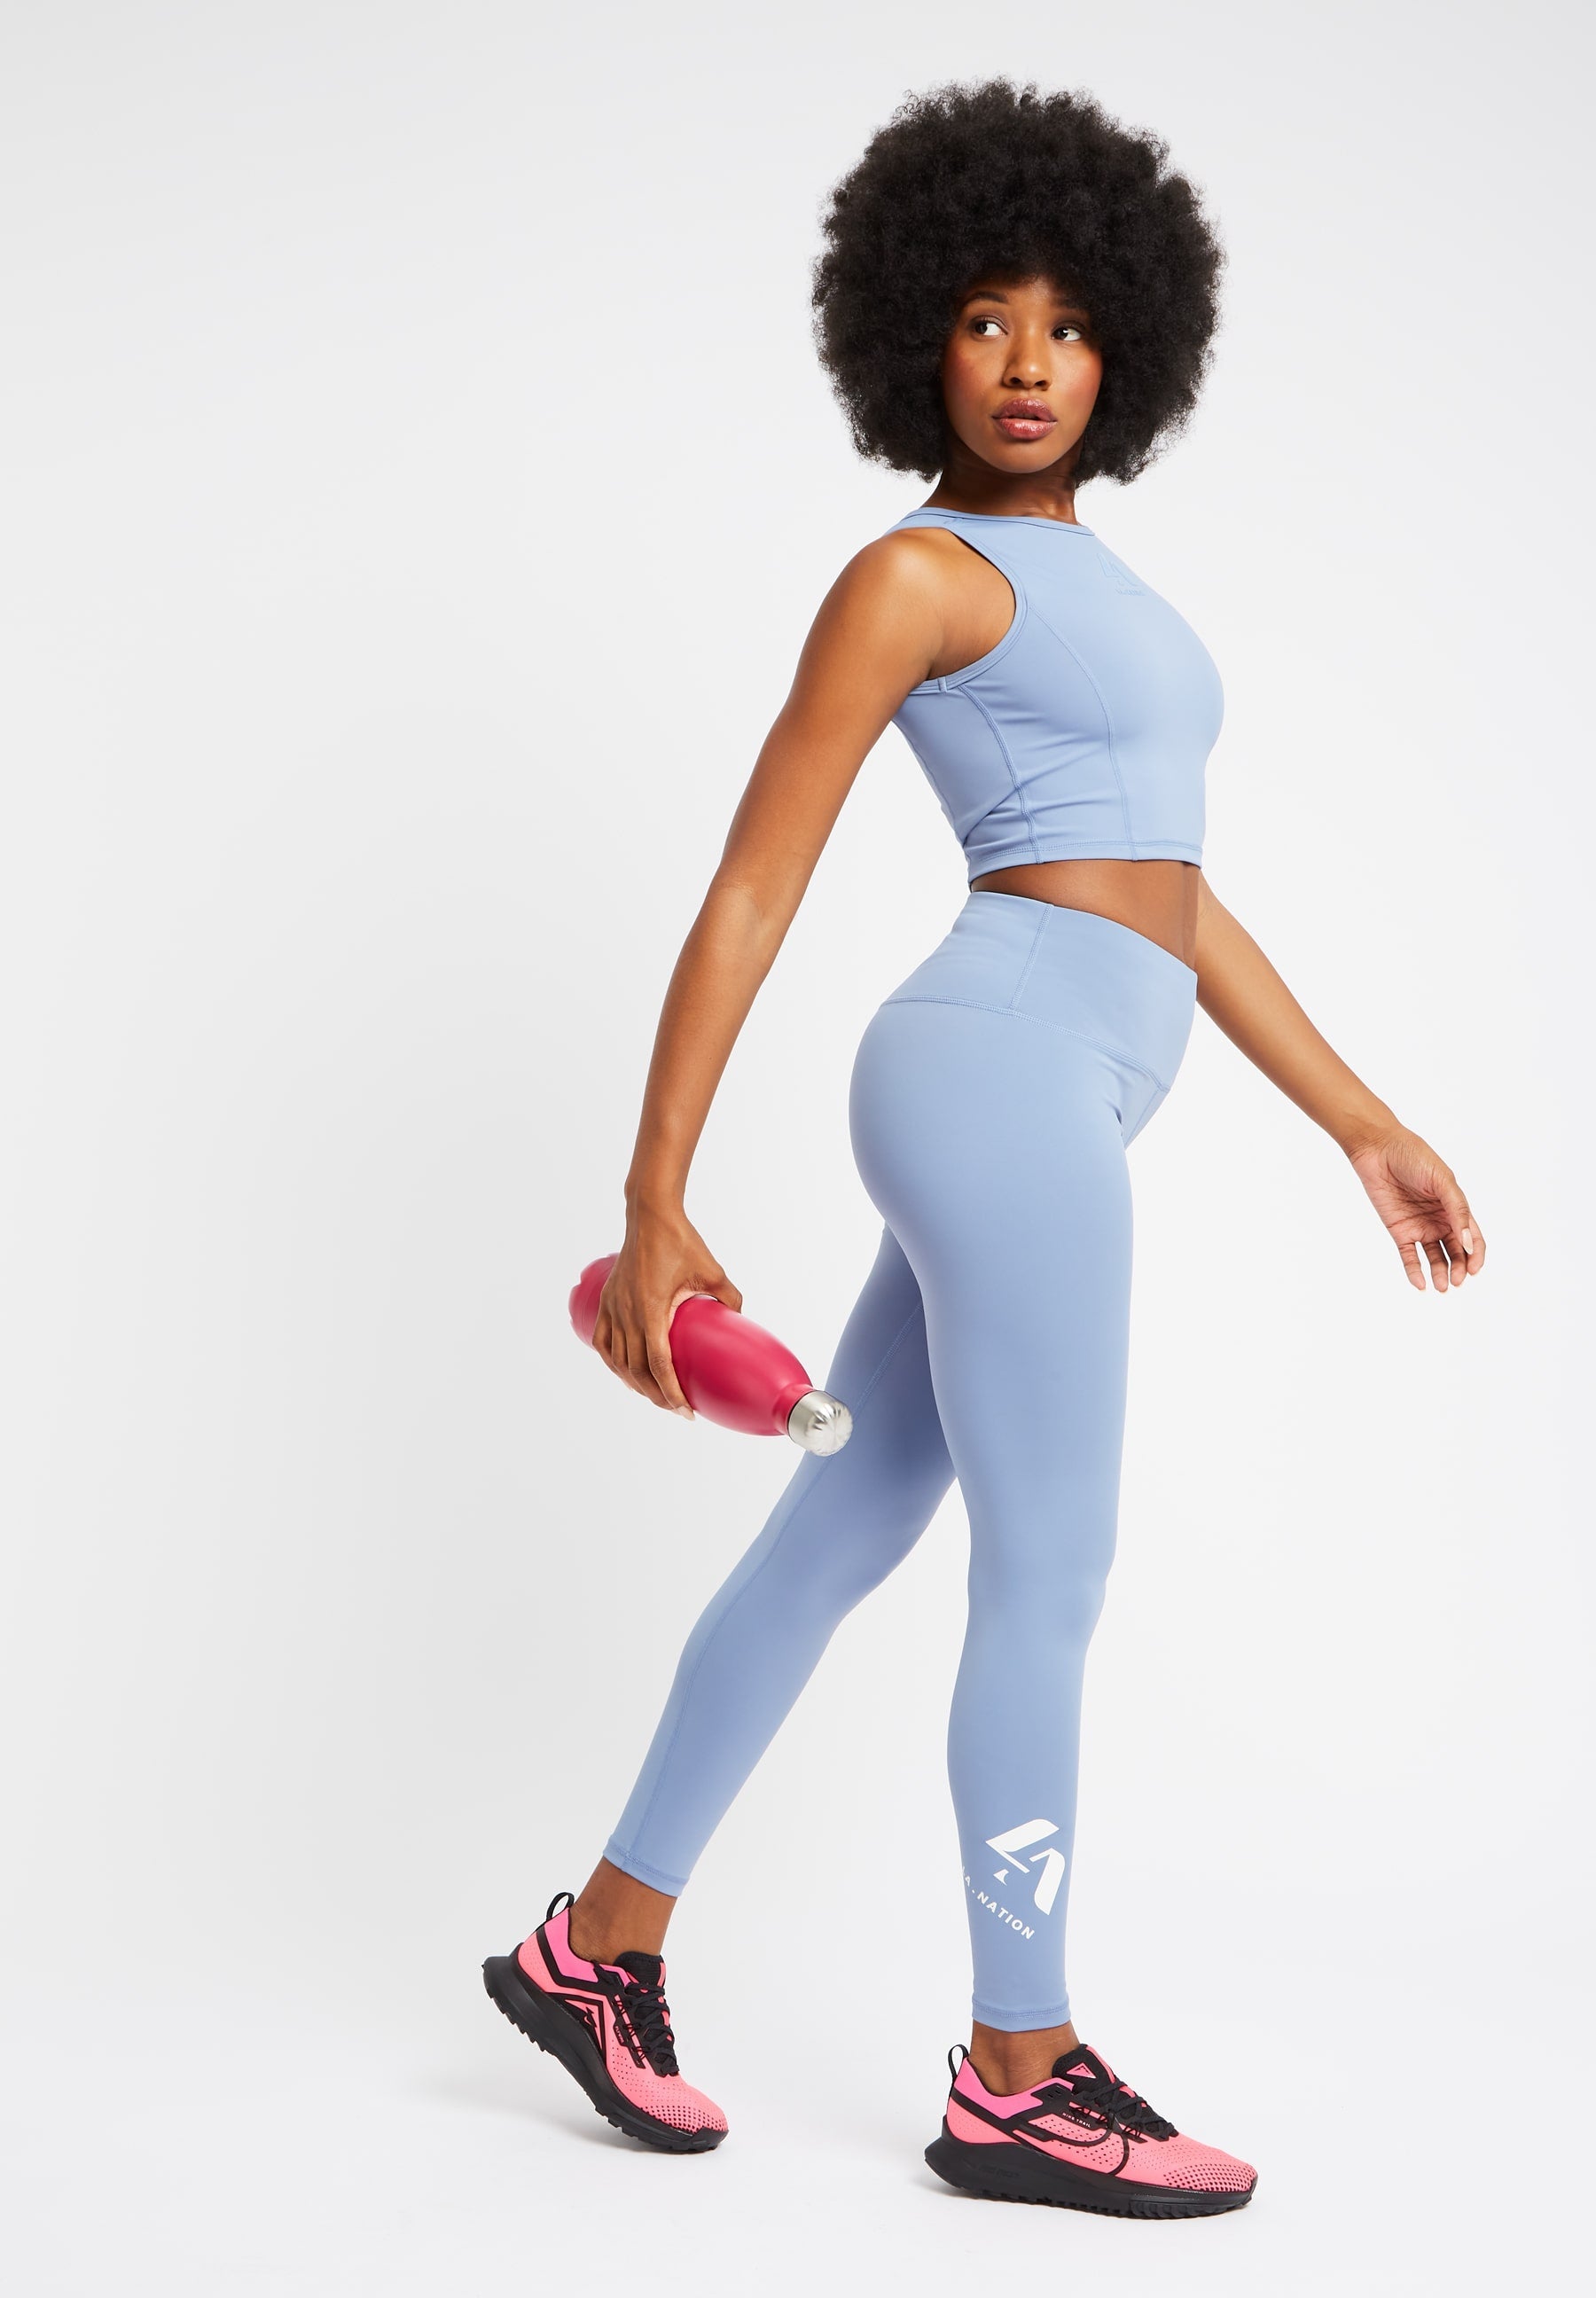 This Two-Piece  Activewear Set Compares to High-End Brands